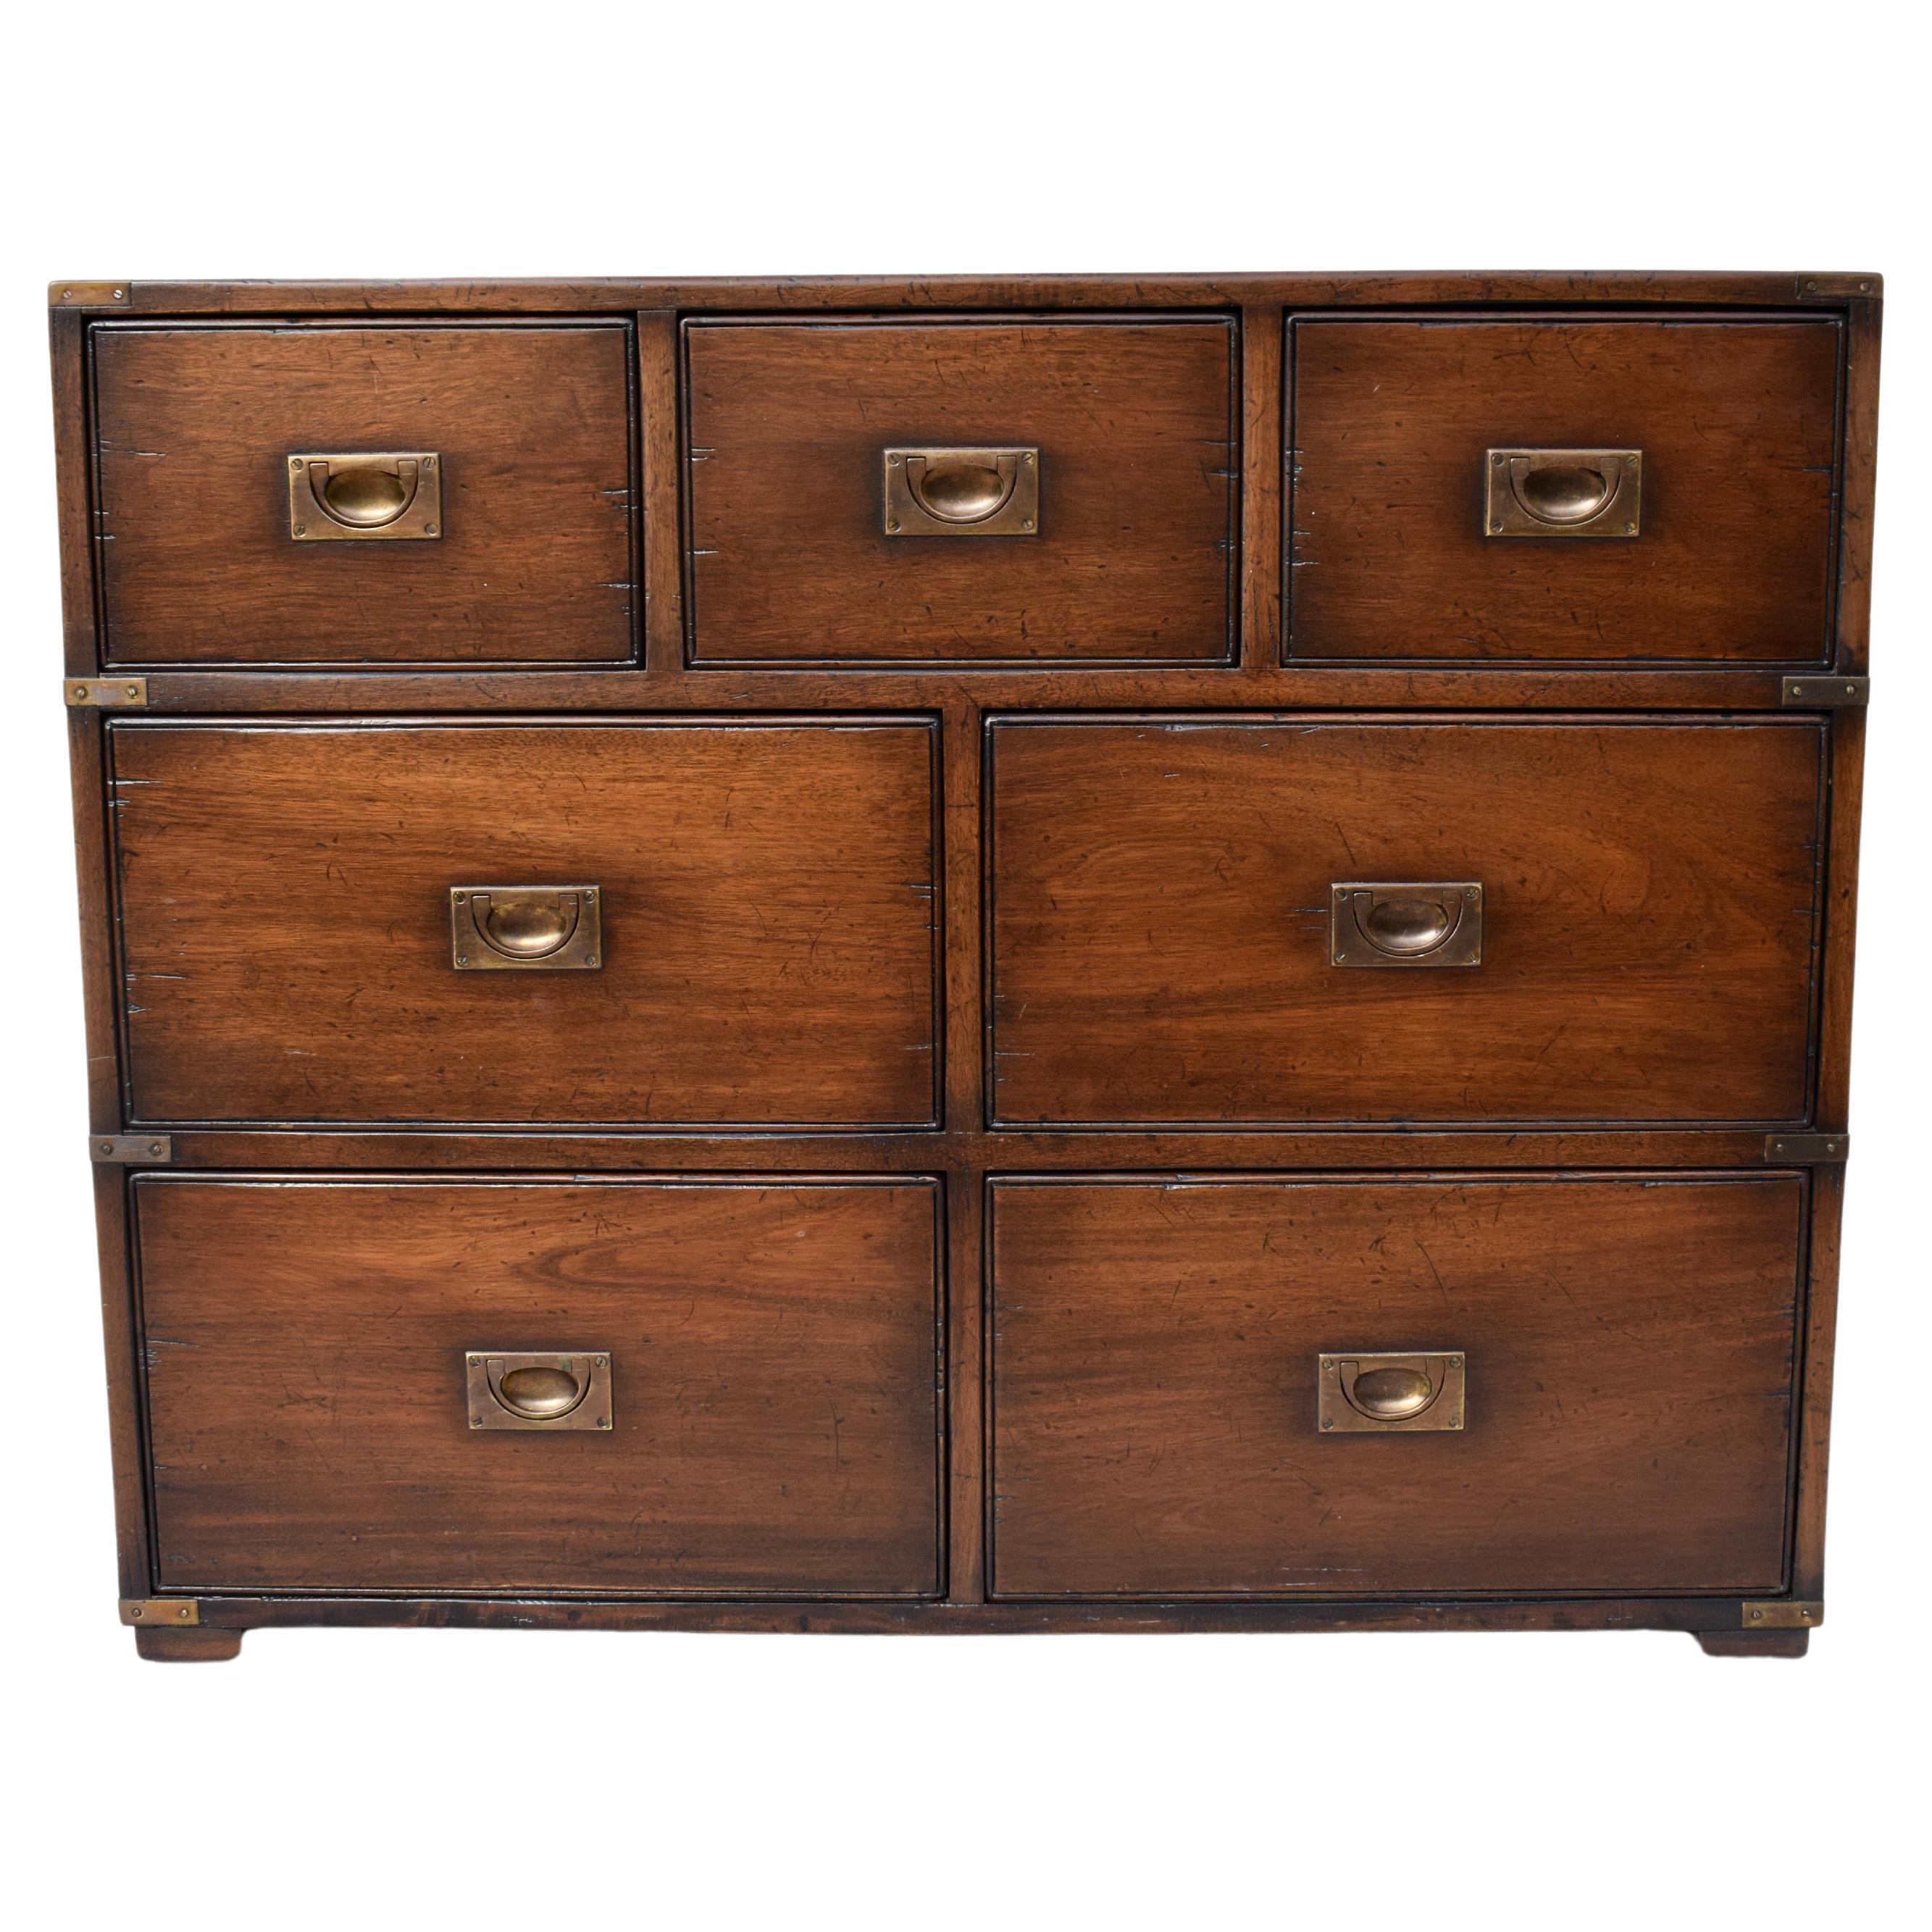 Solid Mahogany English Campaign Chest of Drawers